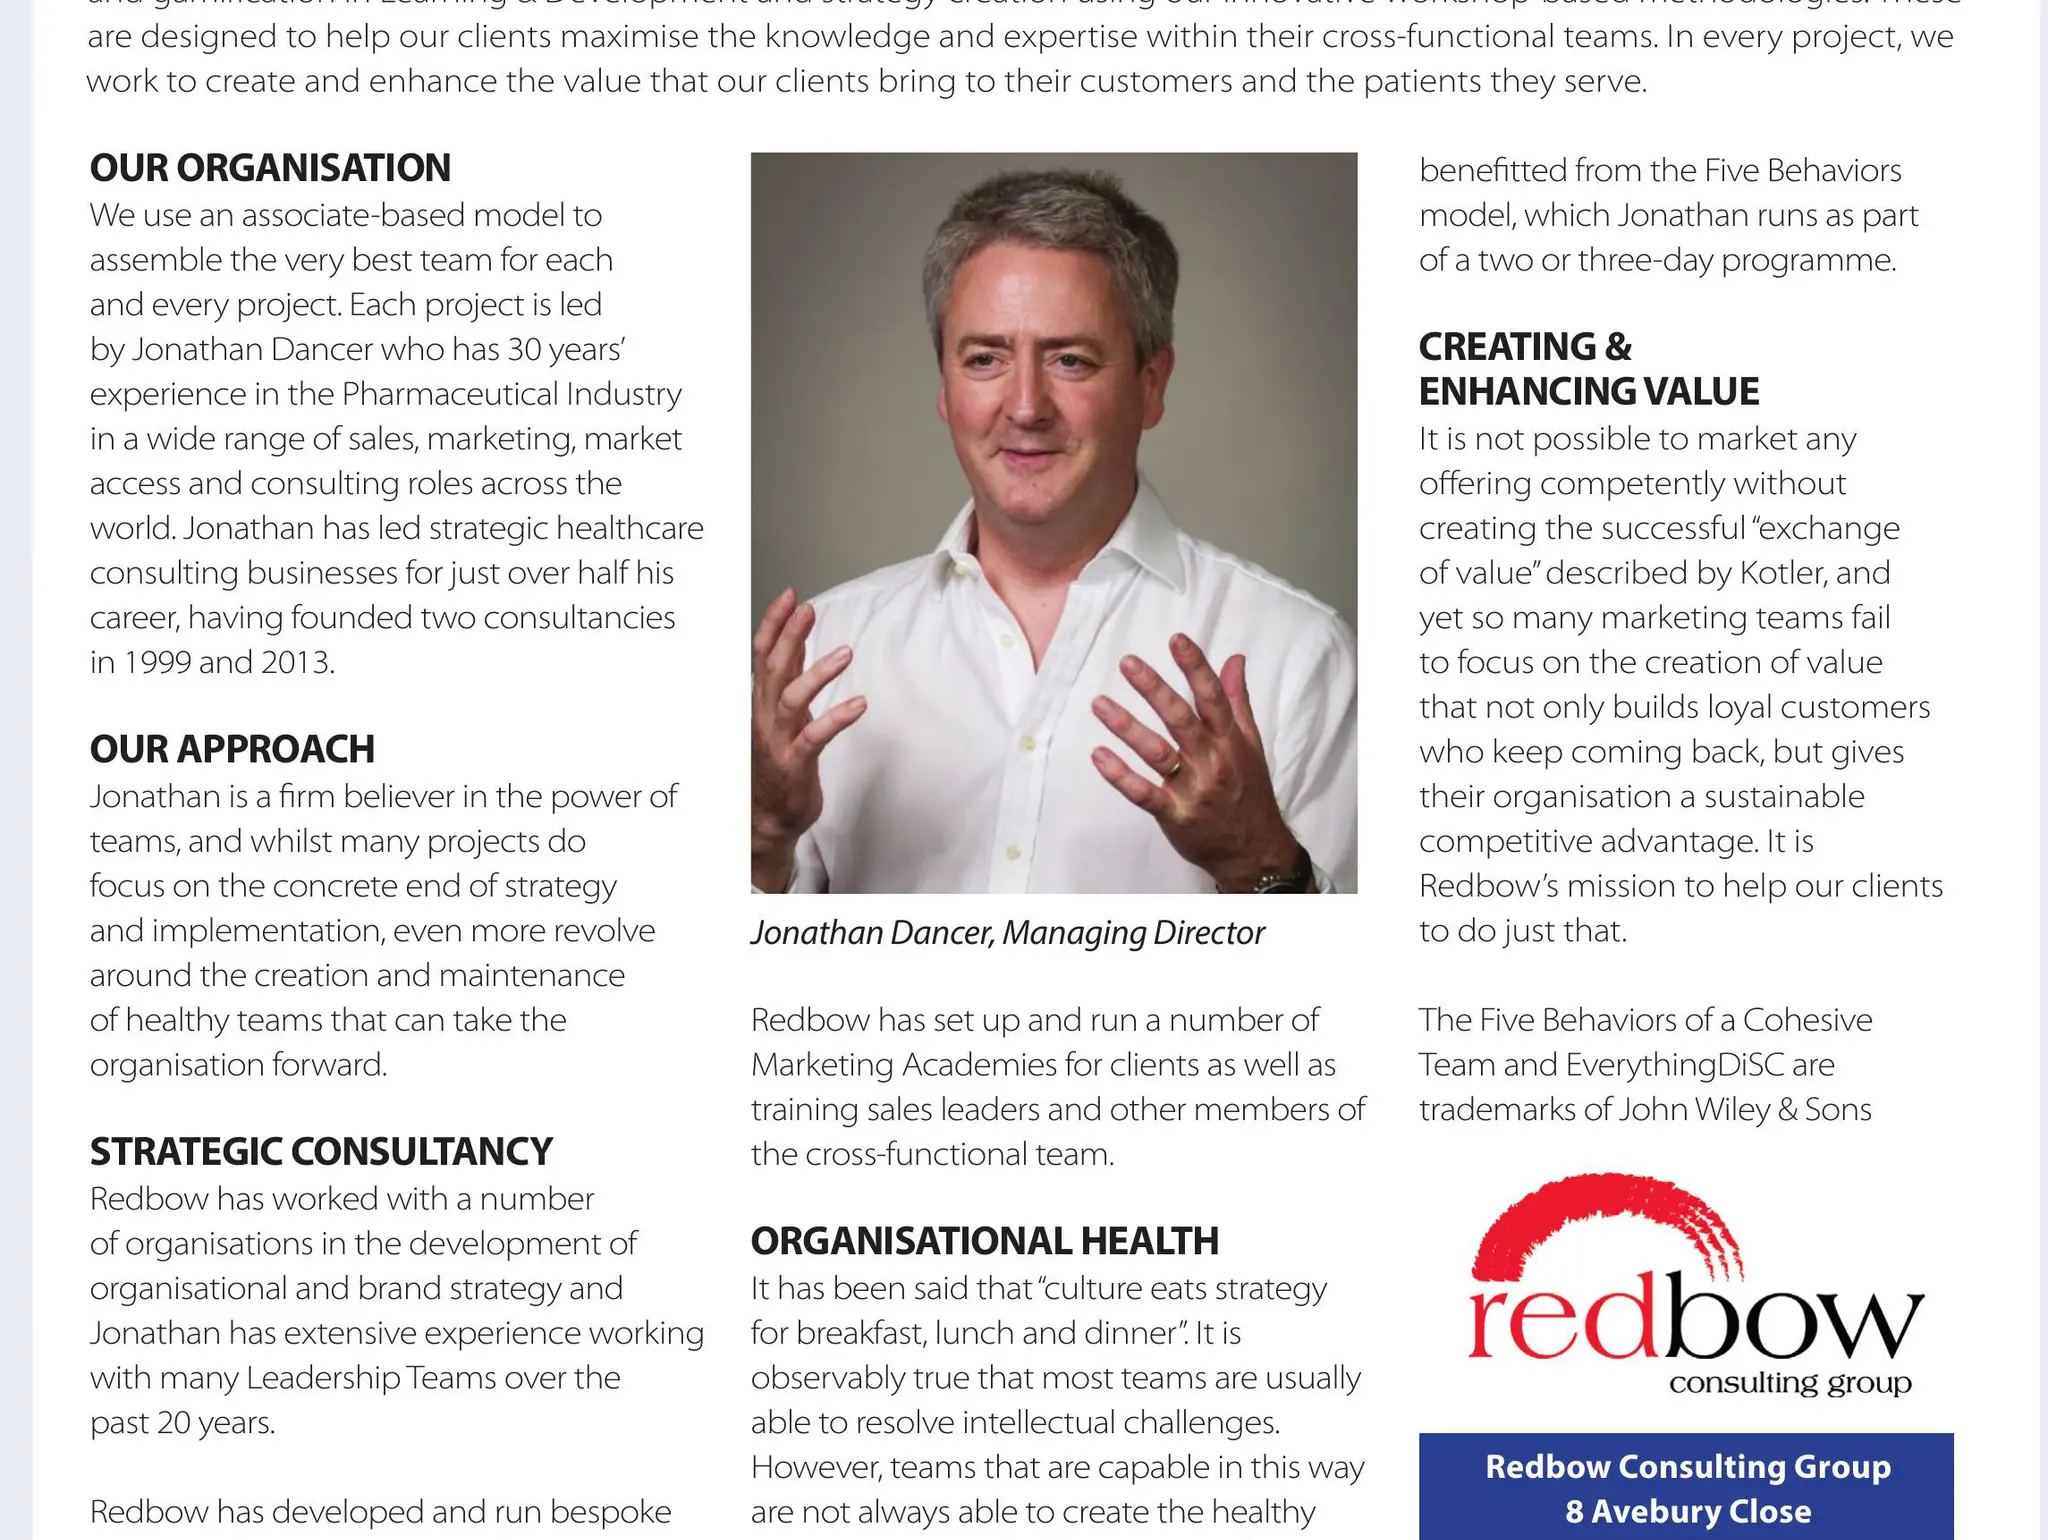 Redbow Consulting Group